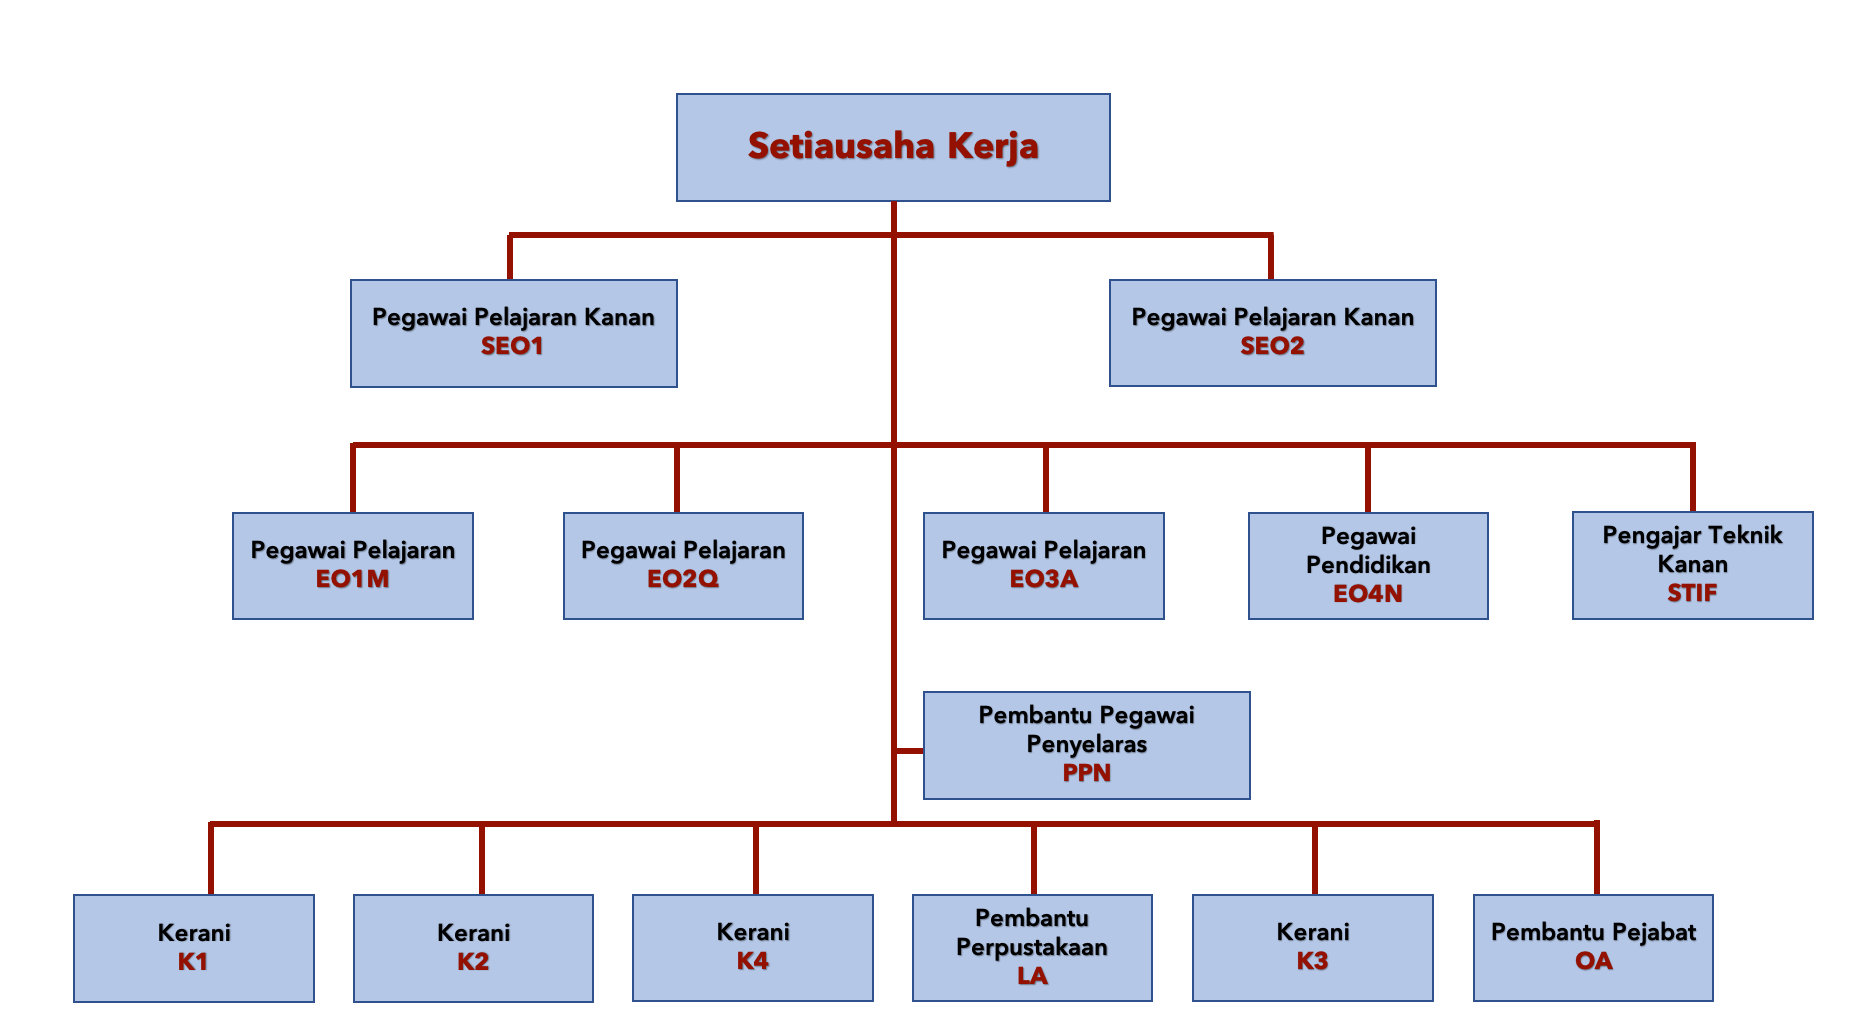 Malay Version_BDNAC Sec Org Structure_2020.png